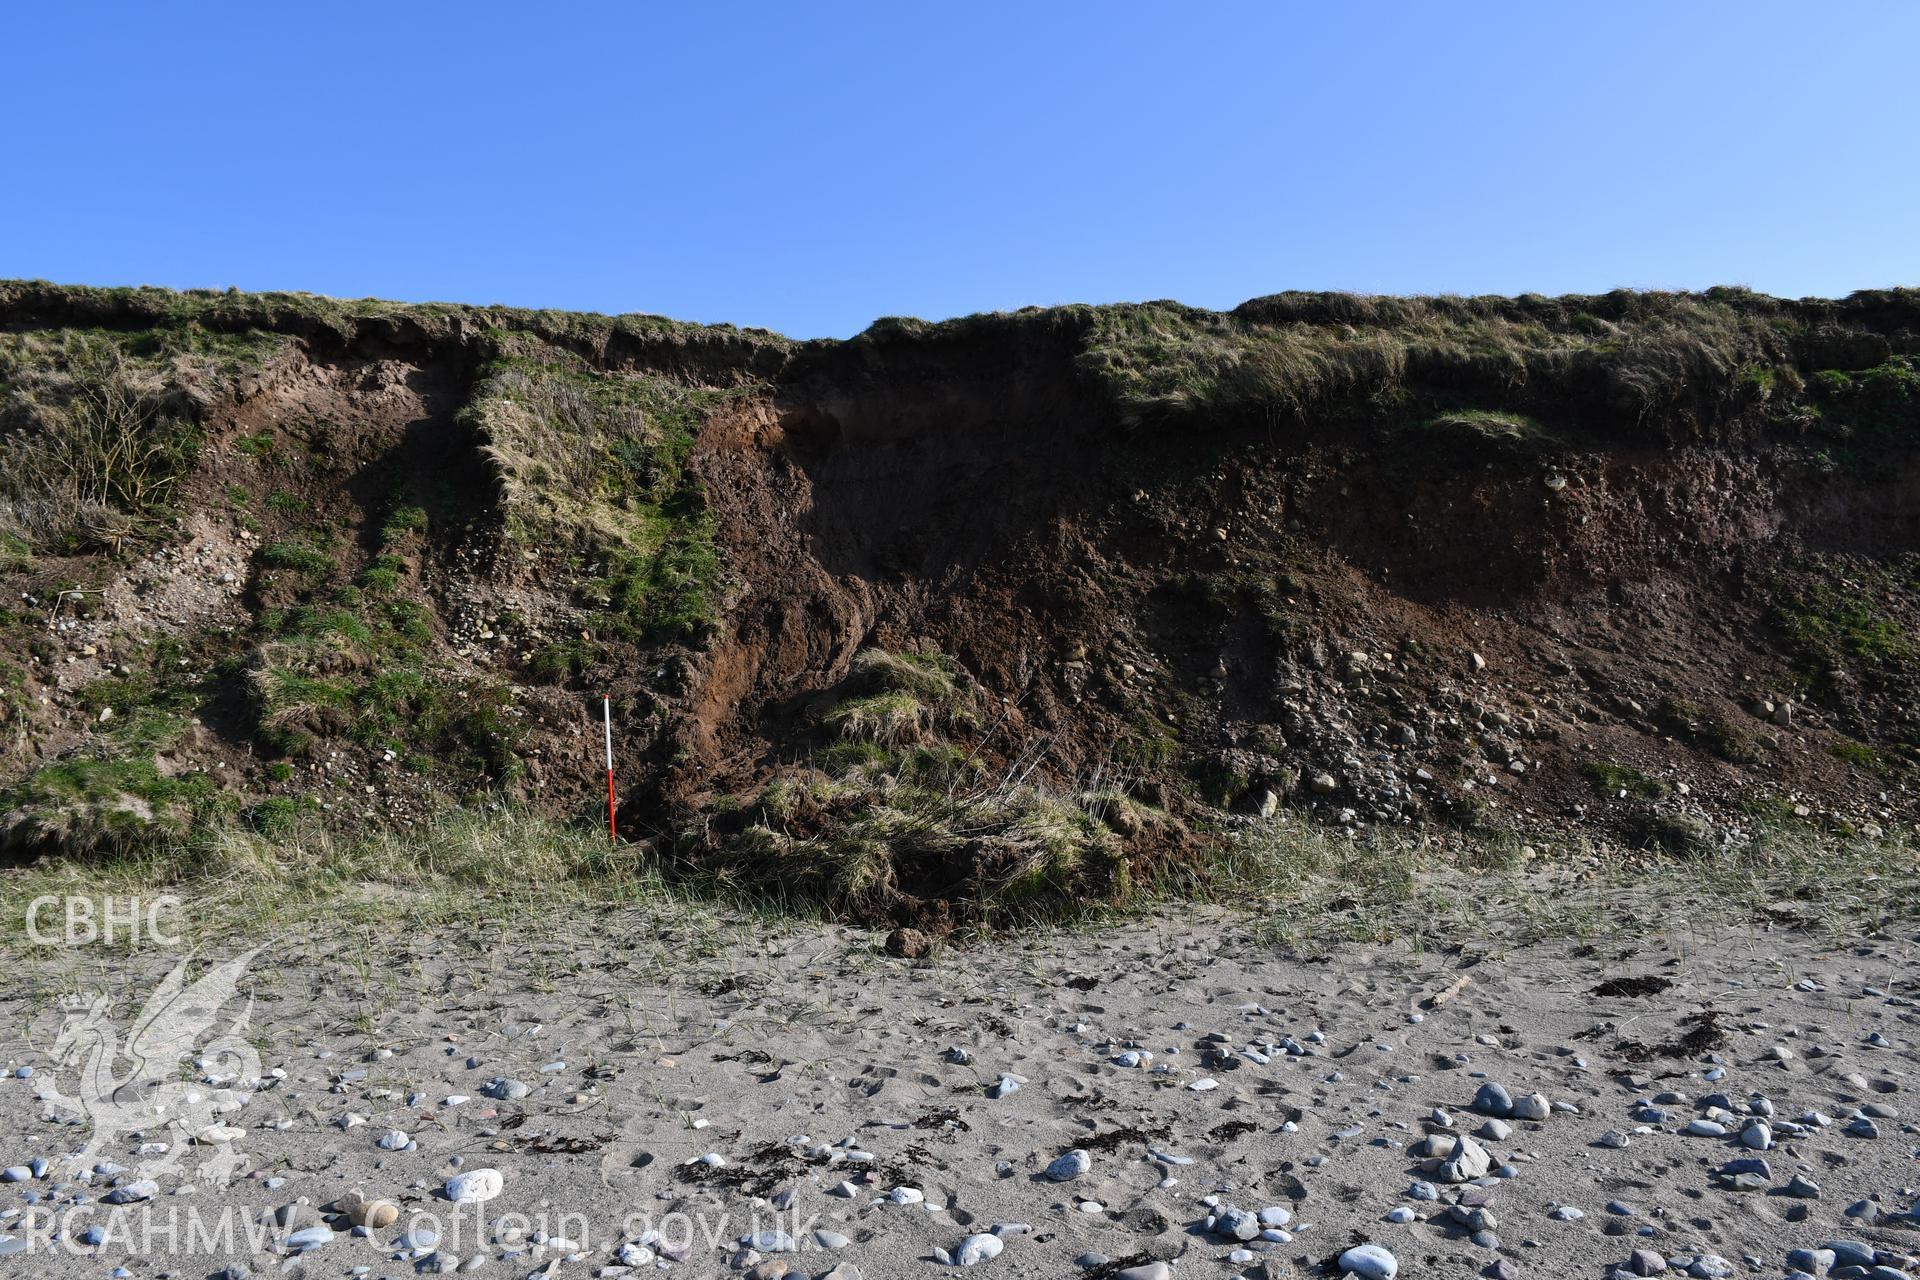 Wide shot showing newly exposed area of the cliff face following a collapse of sediment. 2m scale. Taken by Toby Driver. Produced with EU funds through the Ireland Wales Co-operation Programme 2014-2023. All material made freely available through the Open